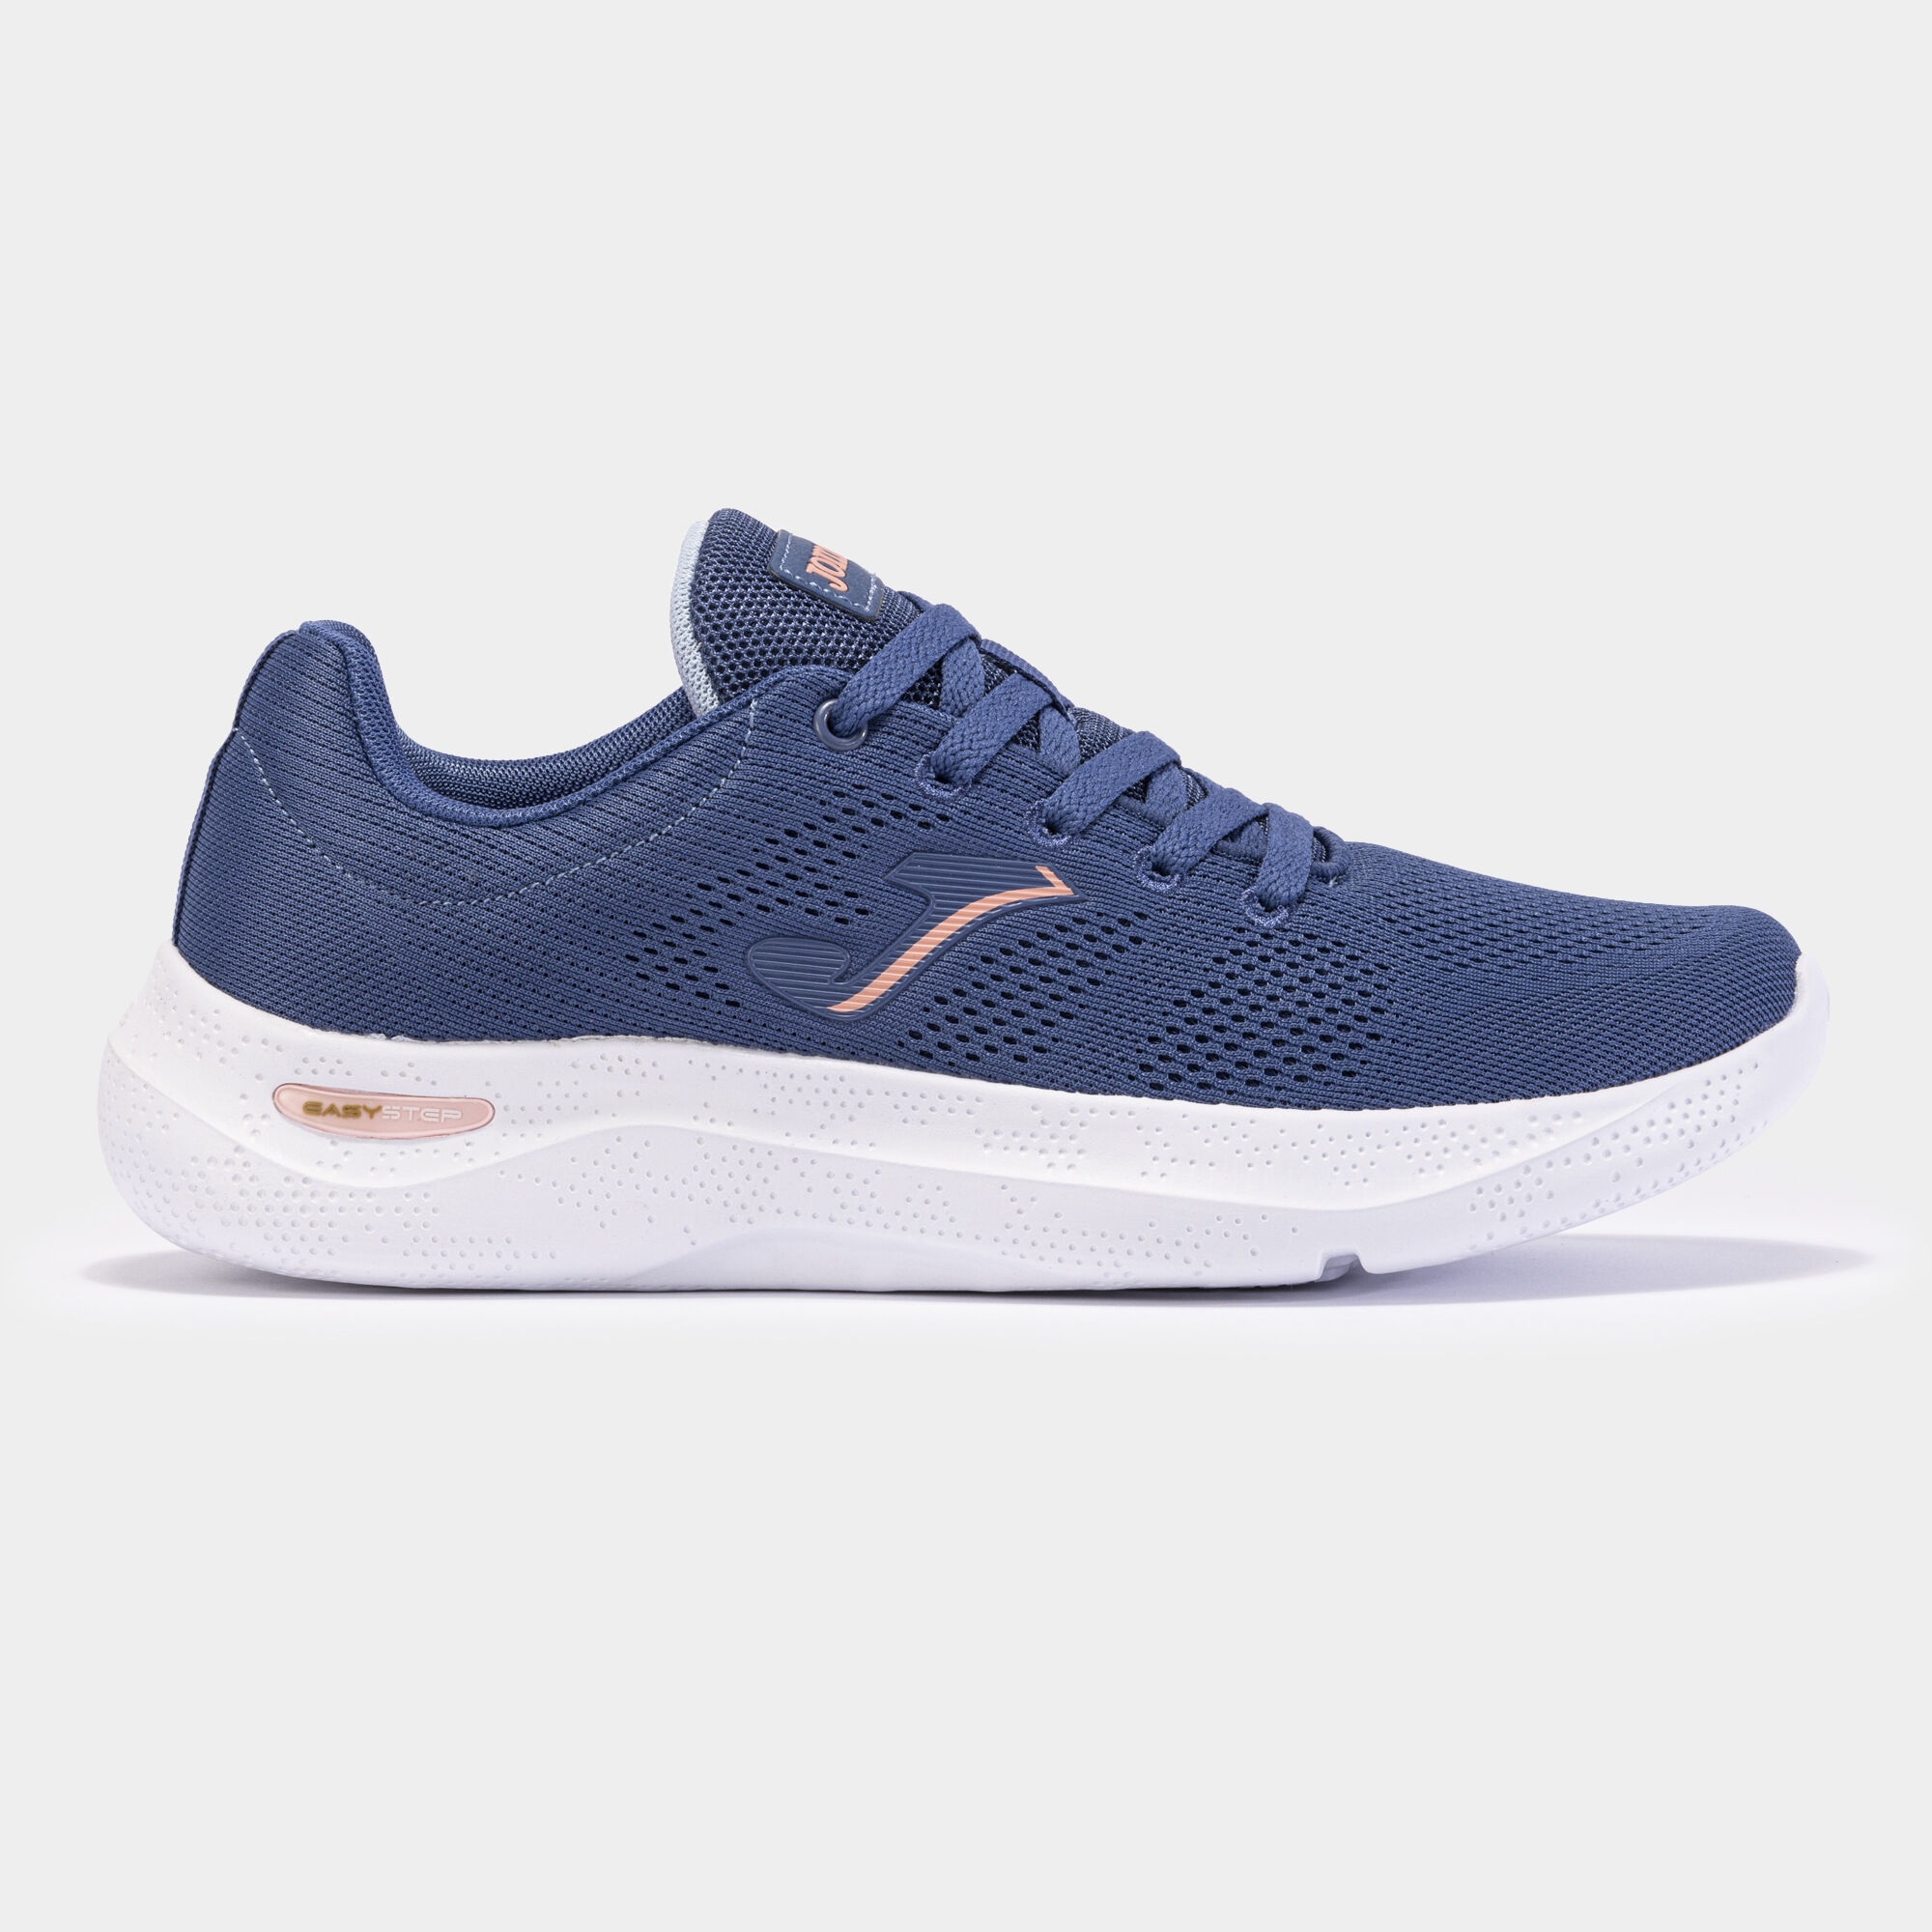 Chaussures casual Corinto Lady 23 femme bleu